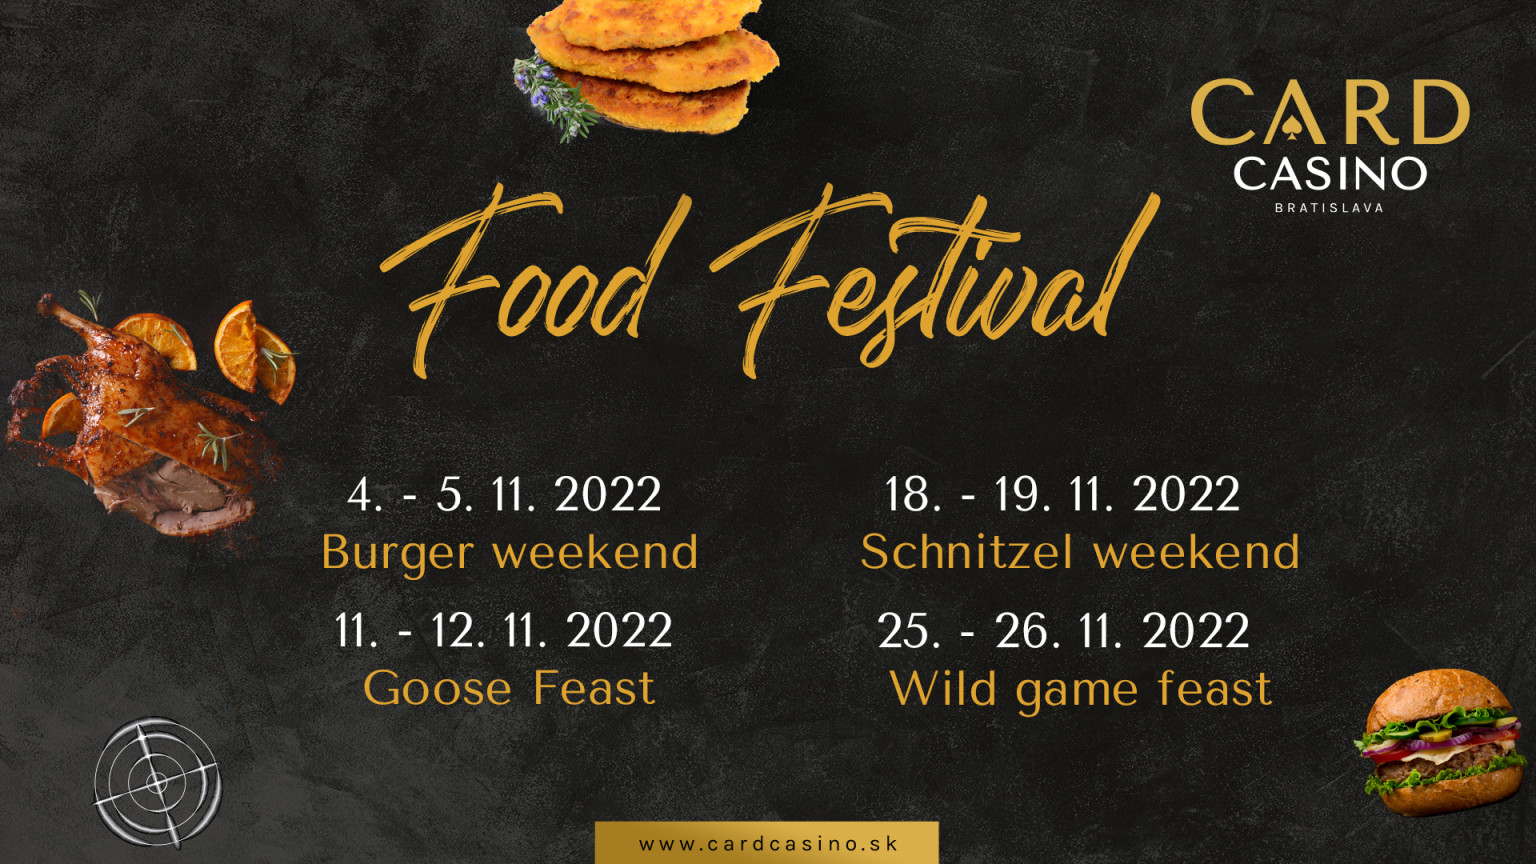 Yes, boss! Enjoy gastro specialties with the Food Festival and attractive competitions